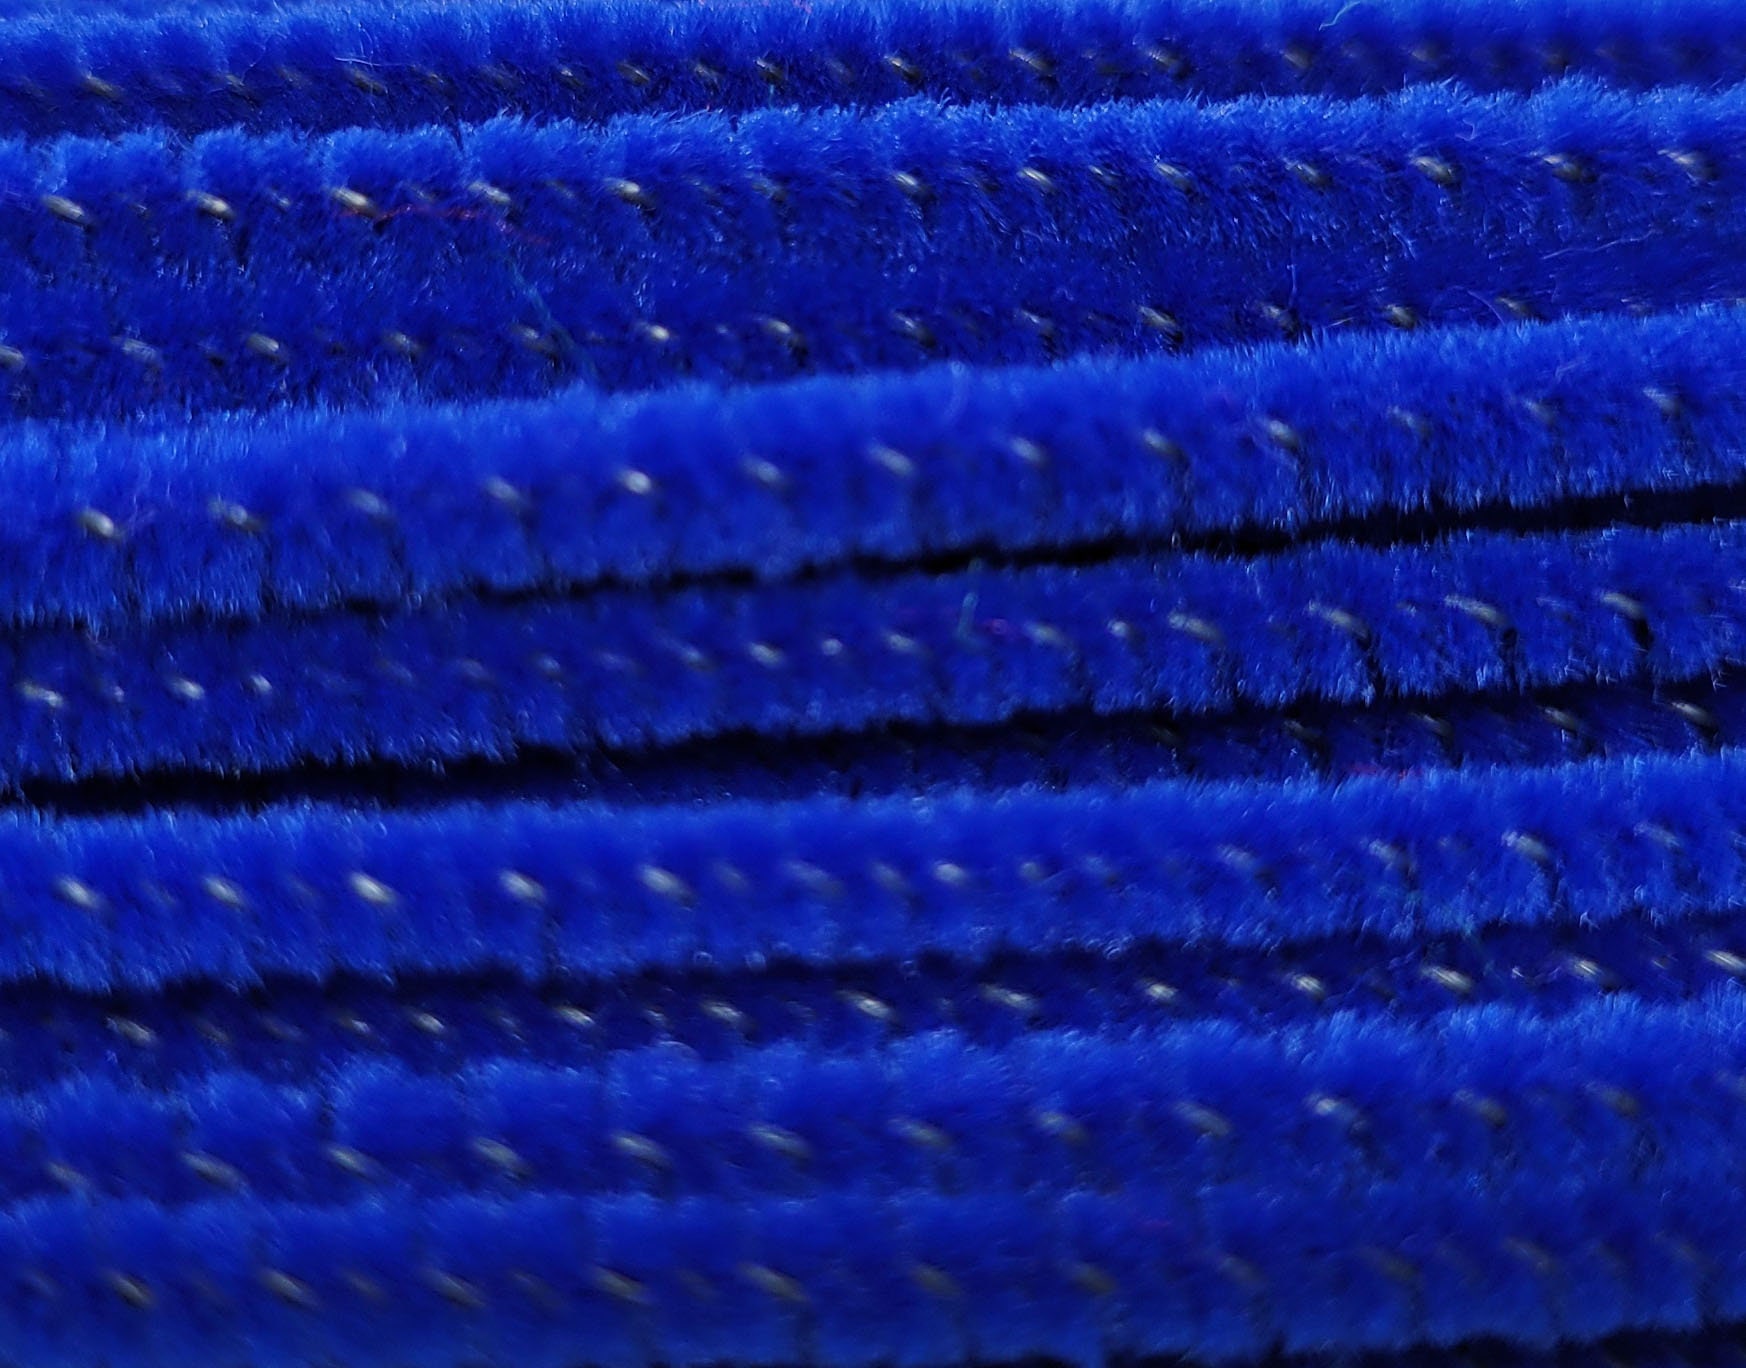 Darice Chenille Stems - 6mm - Royal Blue - 12 Inches - 100 Pieces